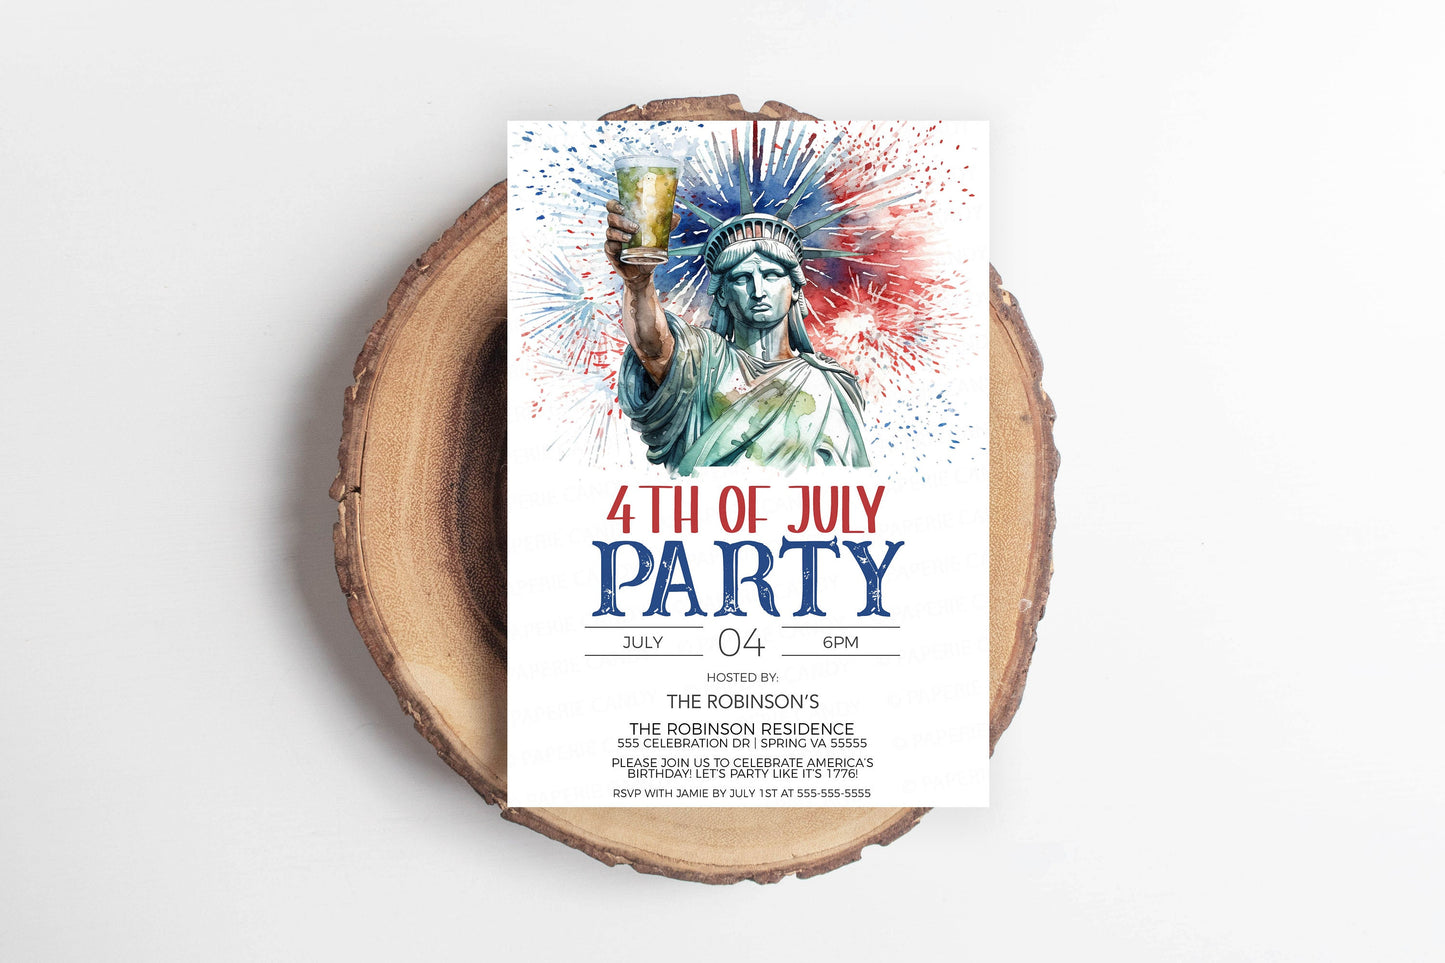 4th Of July Invitation, Independence Day Party Invite, Red White & Brews, July 4th BBQ Fireworks Beer Party, Editable Printable Template